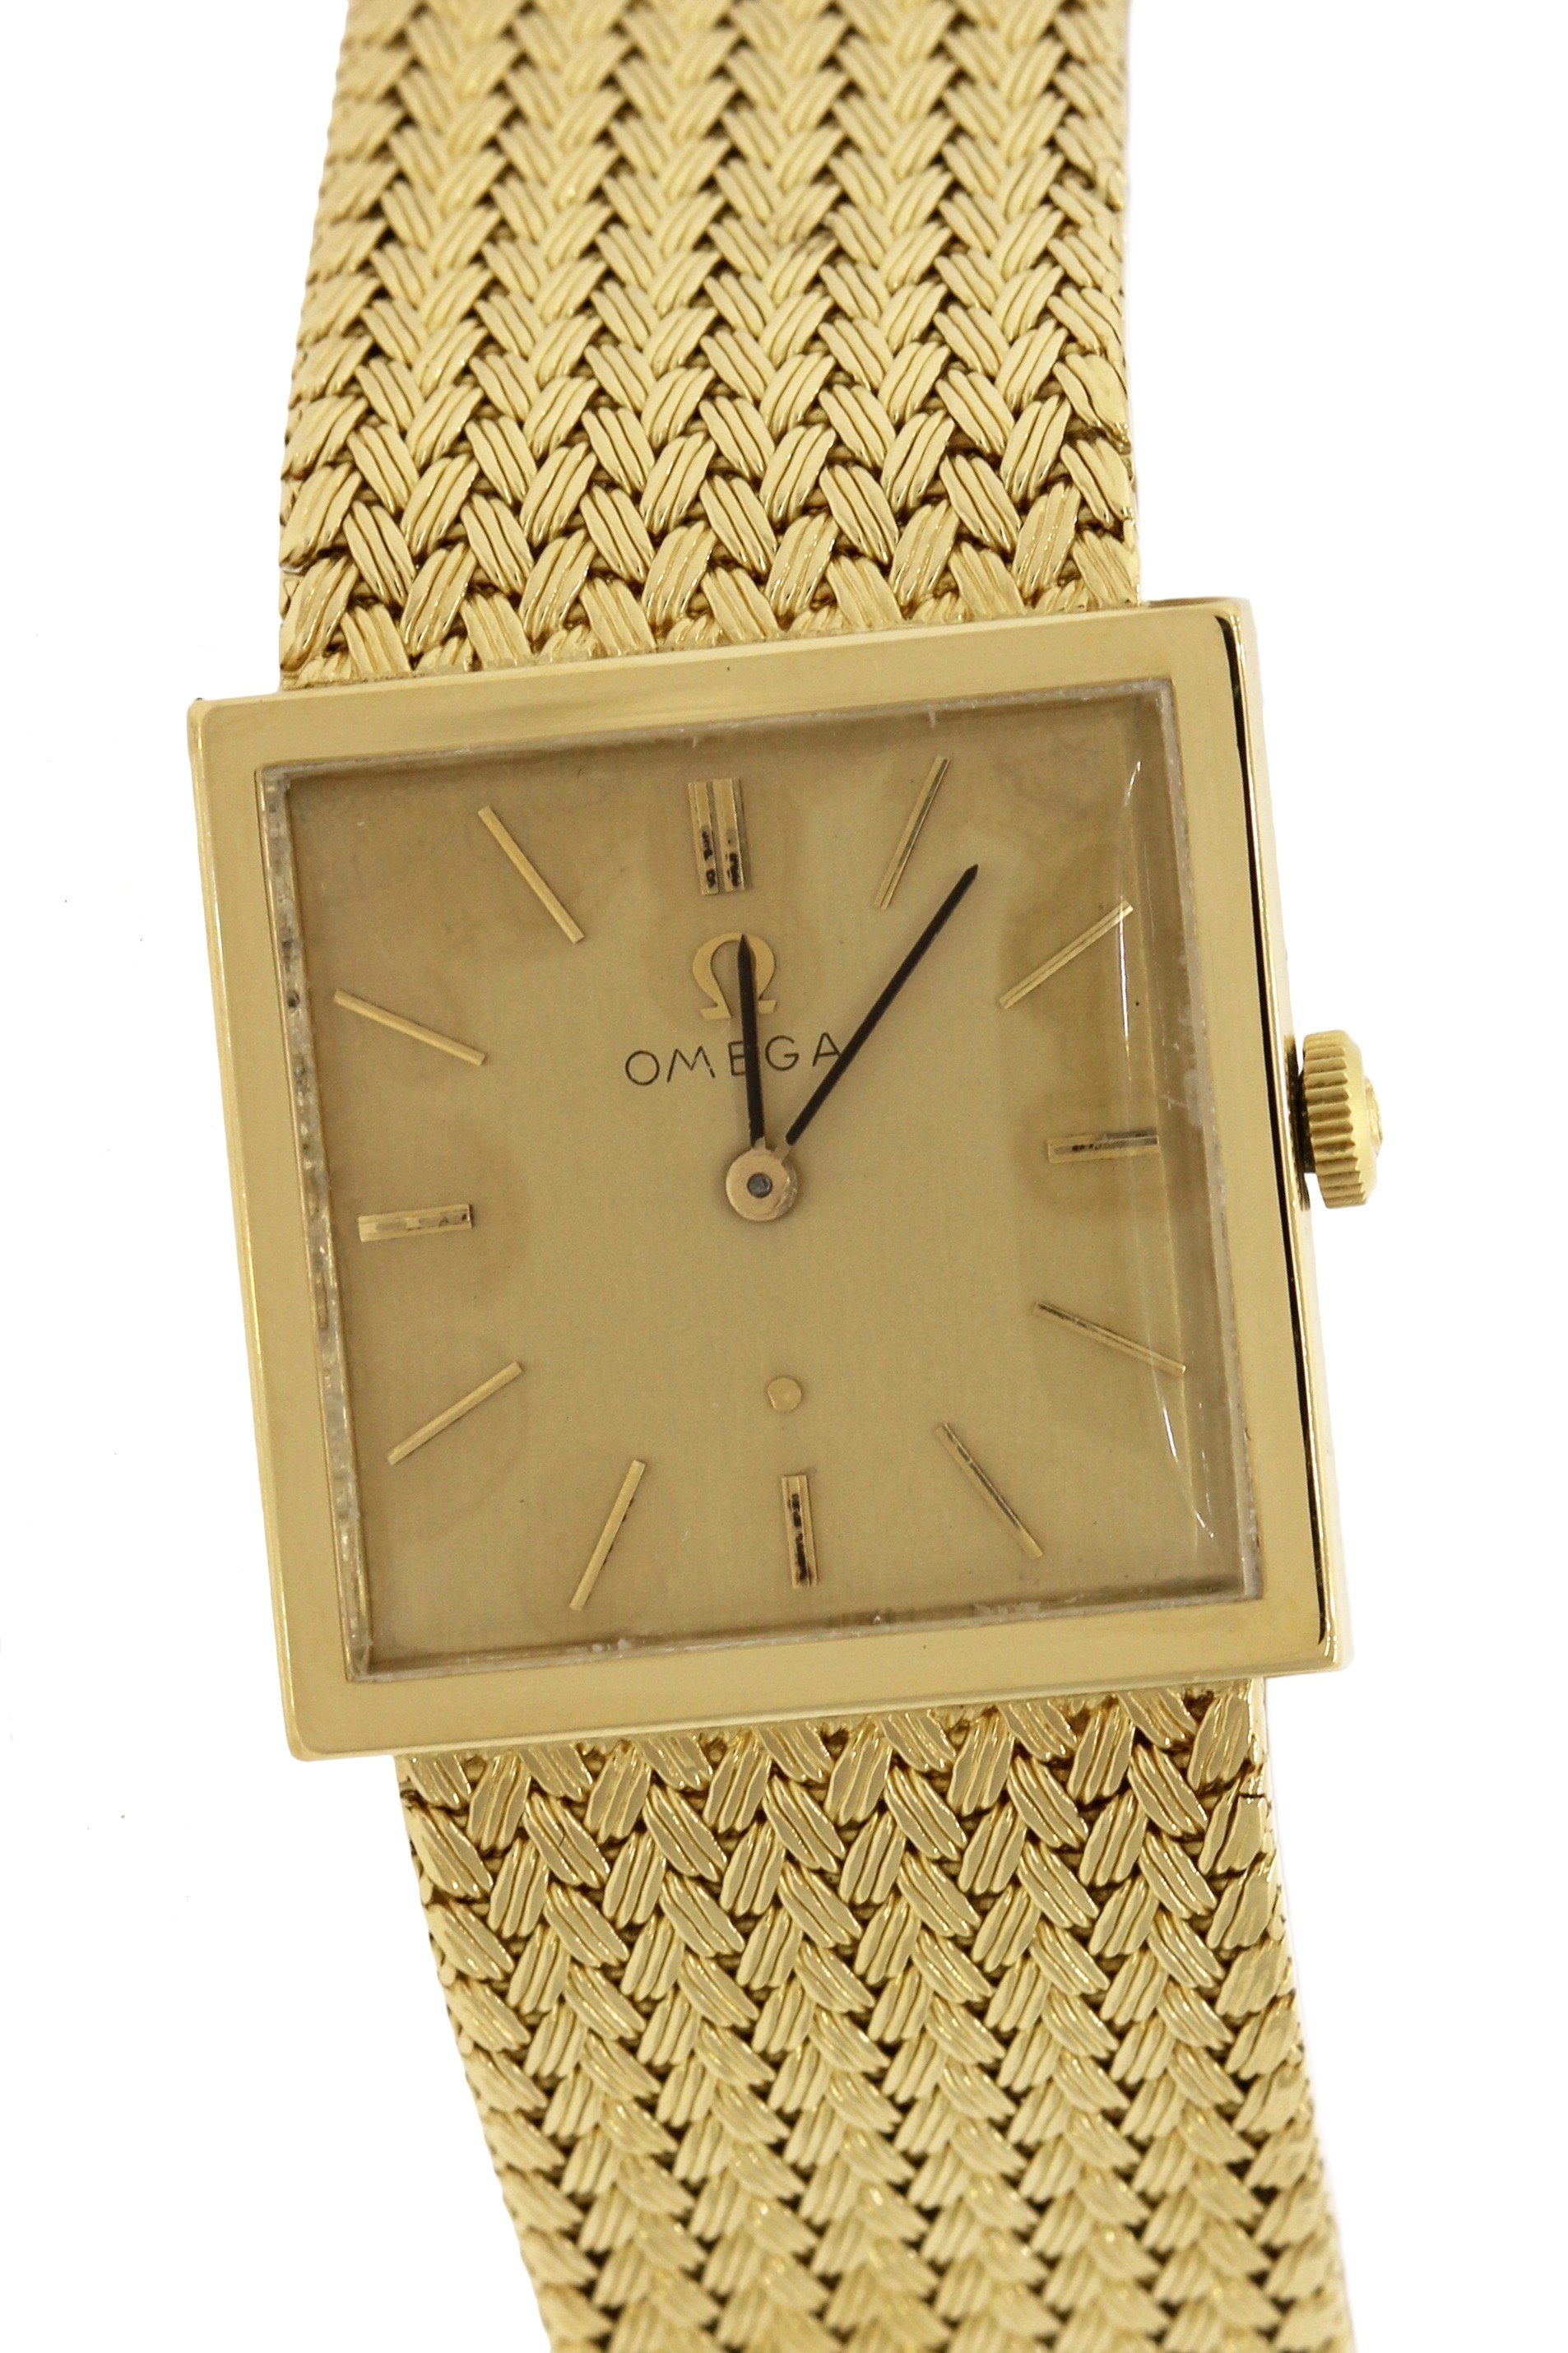 staart noorden dat is alles Vintage 1969 Omega 18K 750 Yellow Gold 24.5mm Square Mechanical Mesh W